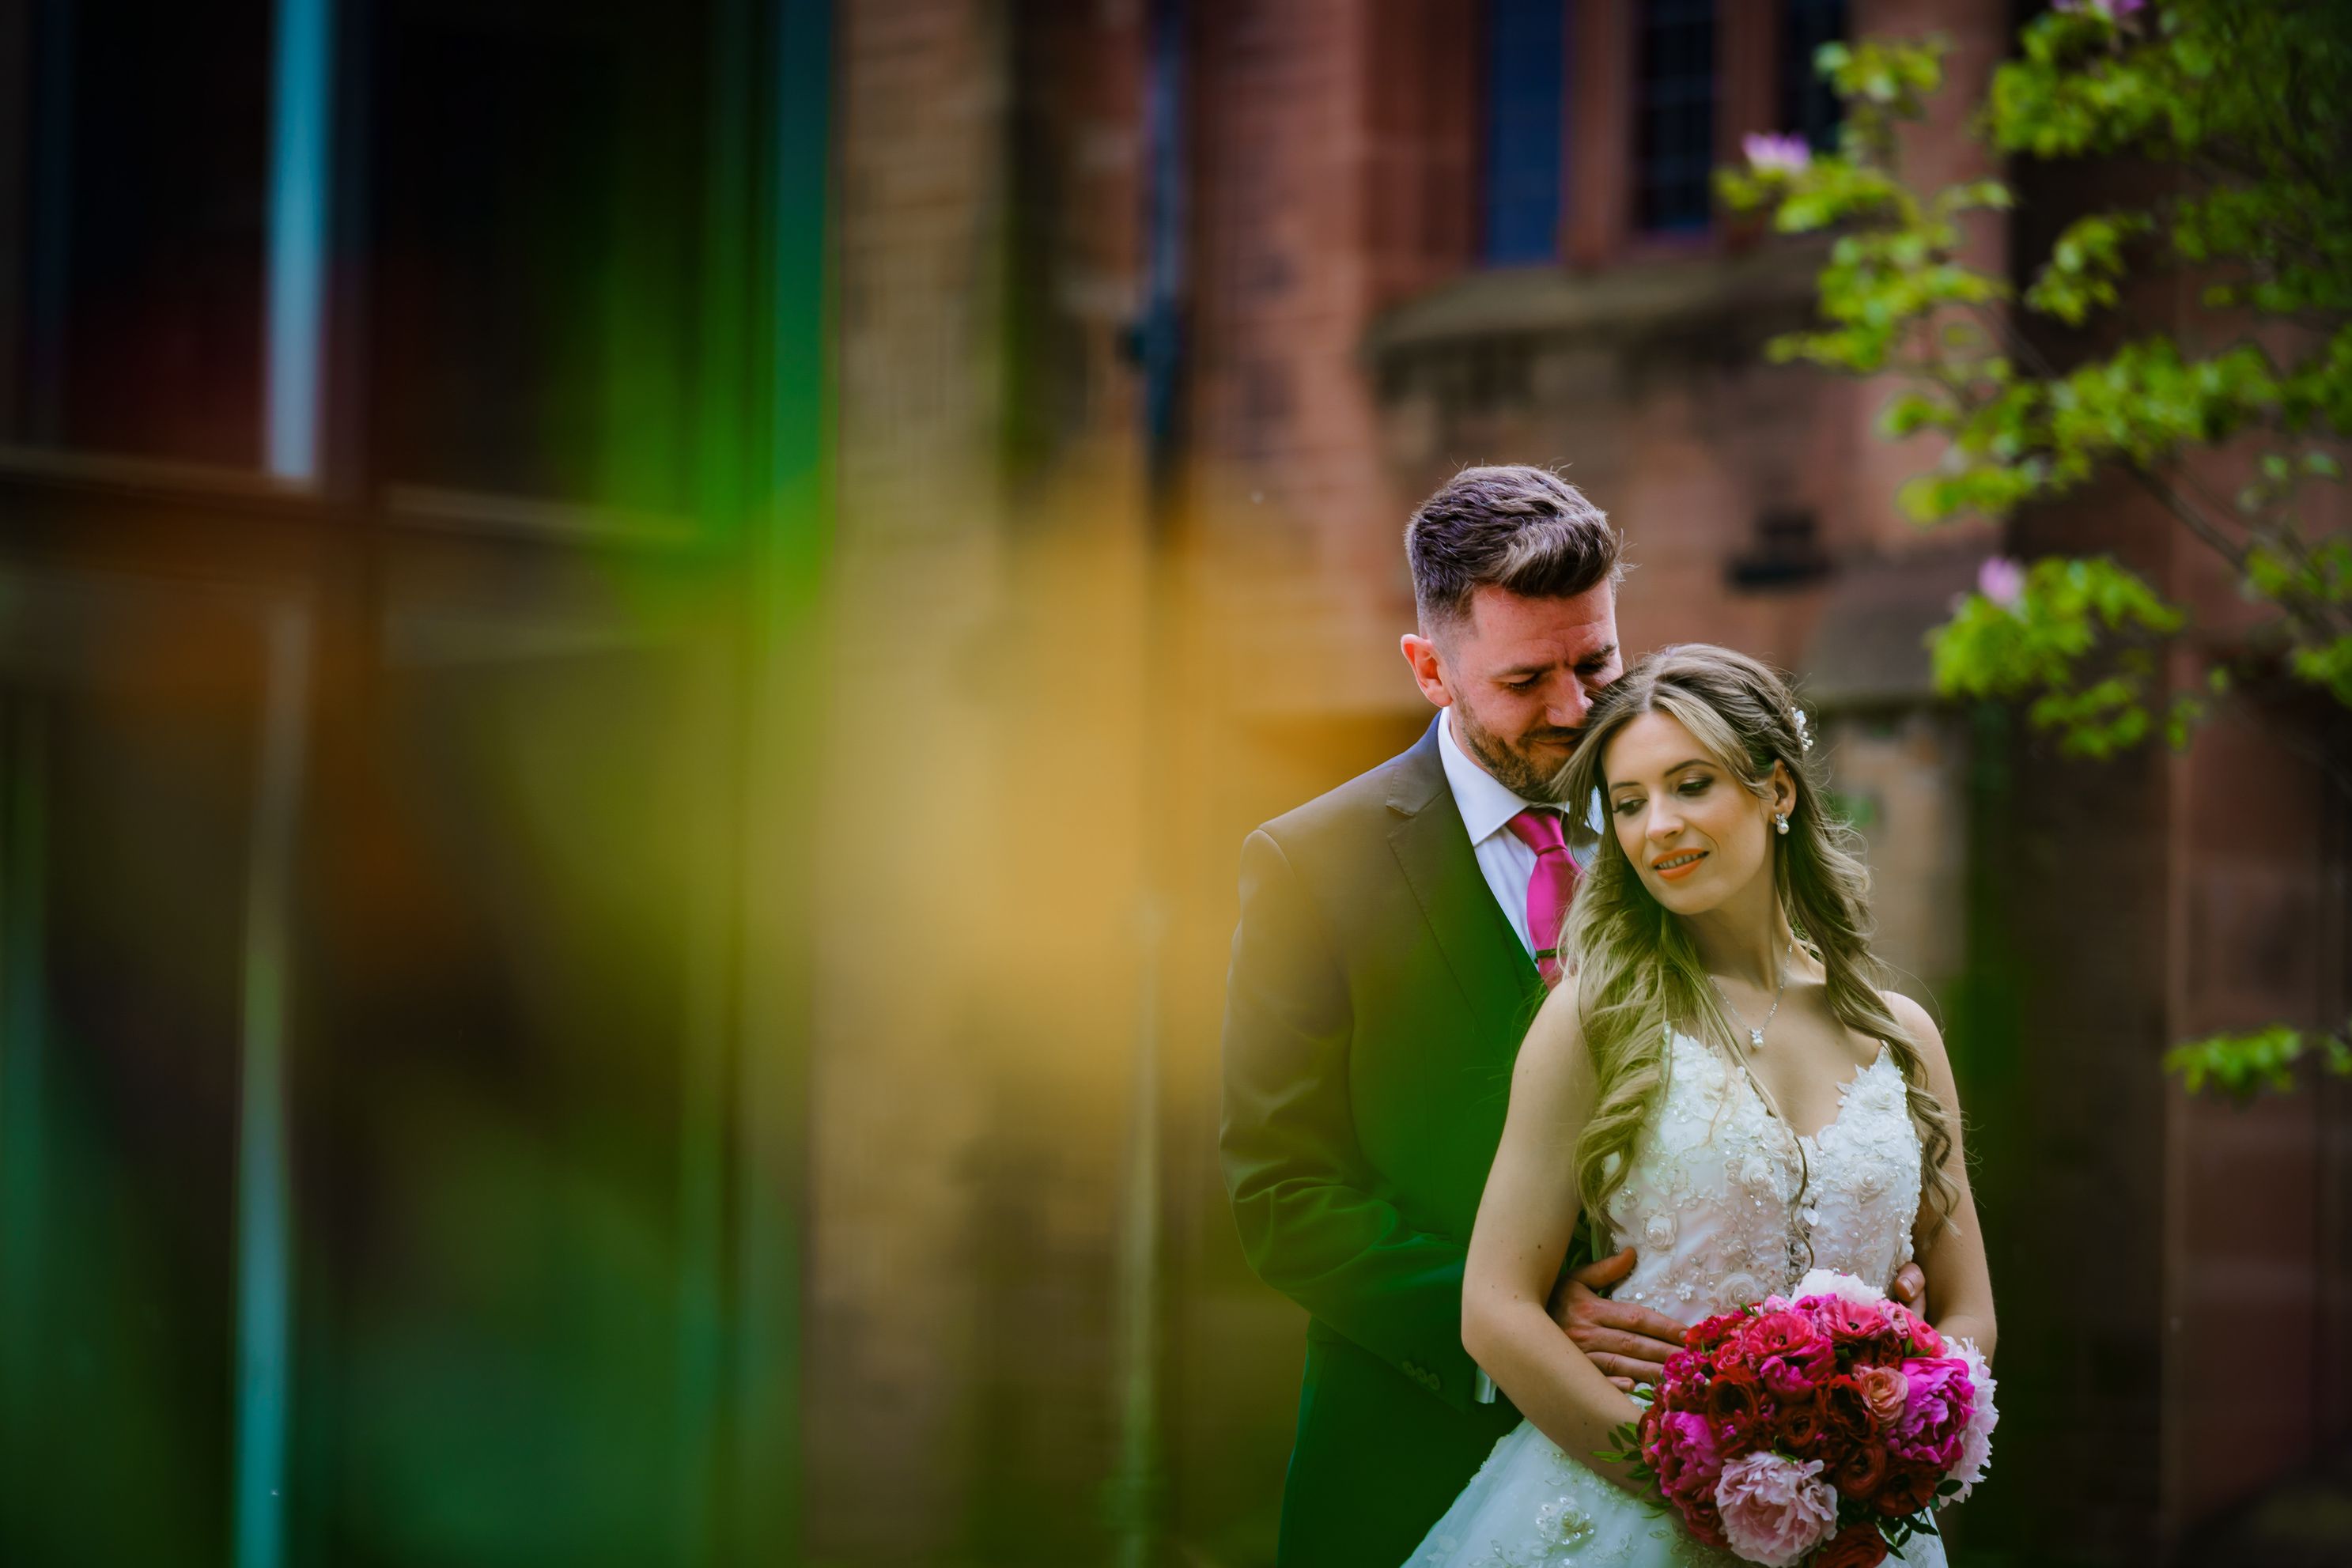 Stunning colour creative bride and groom portrait captured by Bolton School Wedding Photographer